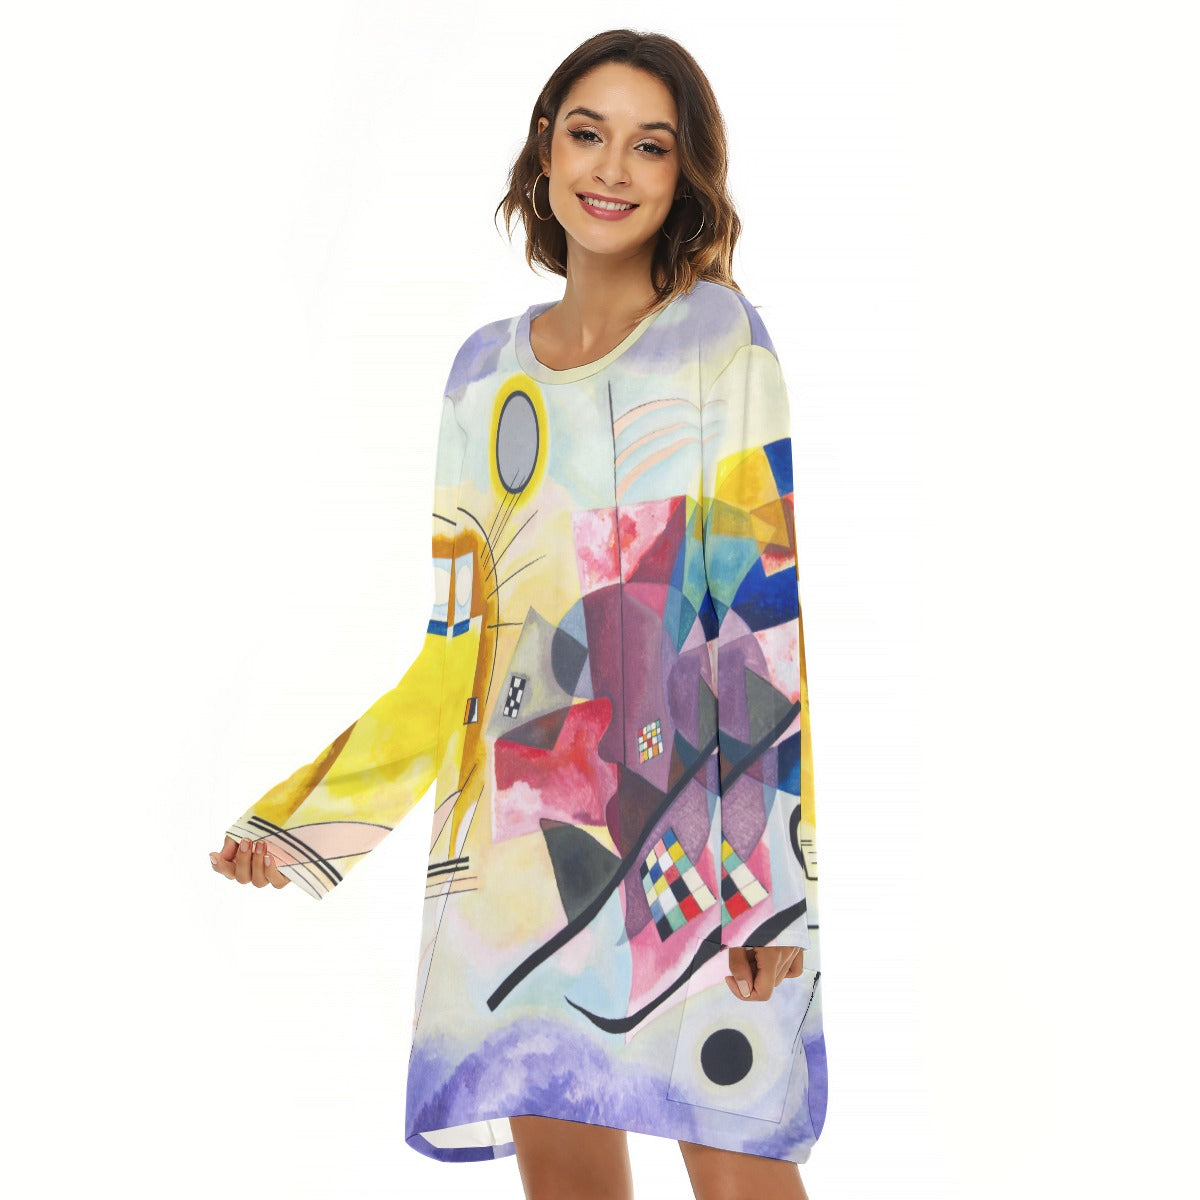 Colorful Wearable Art